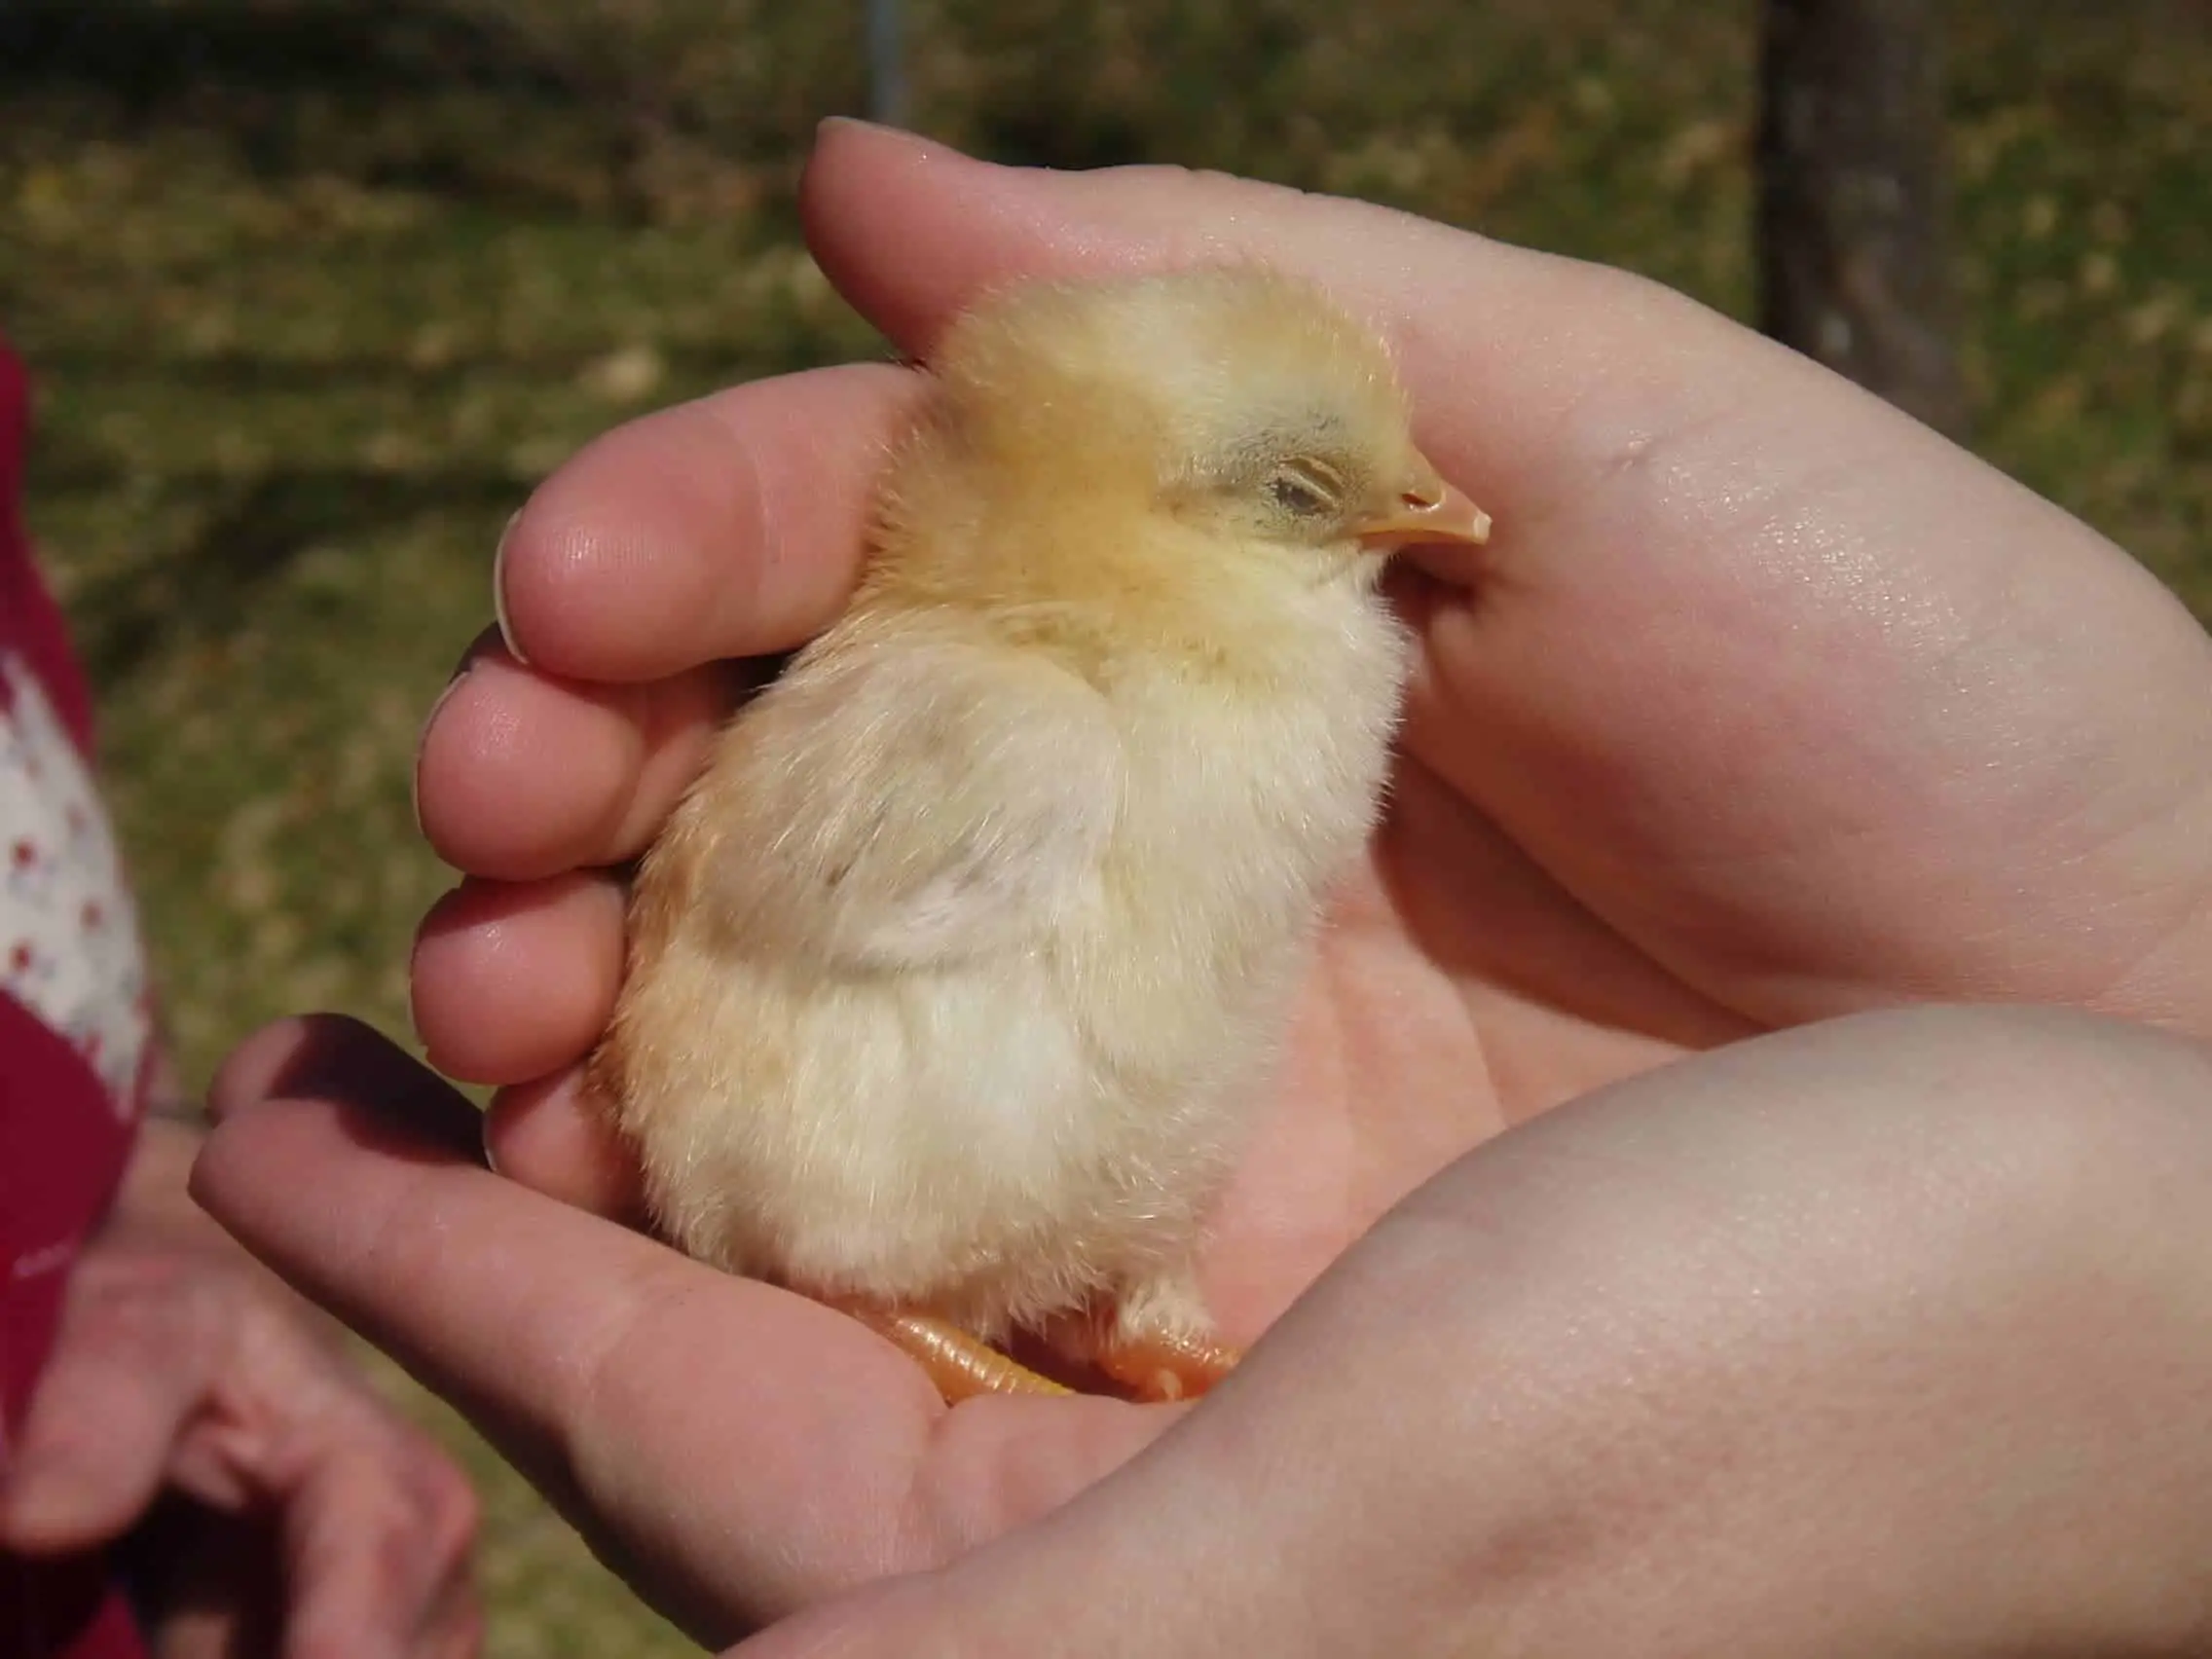 lethargic baby chick with closed eyes